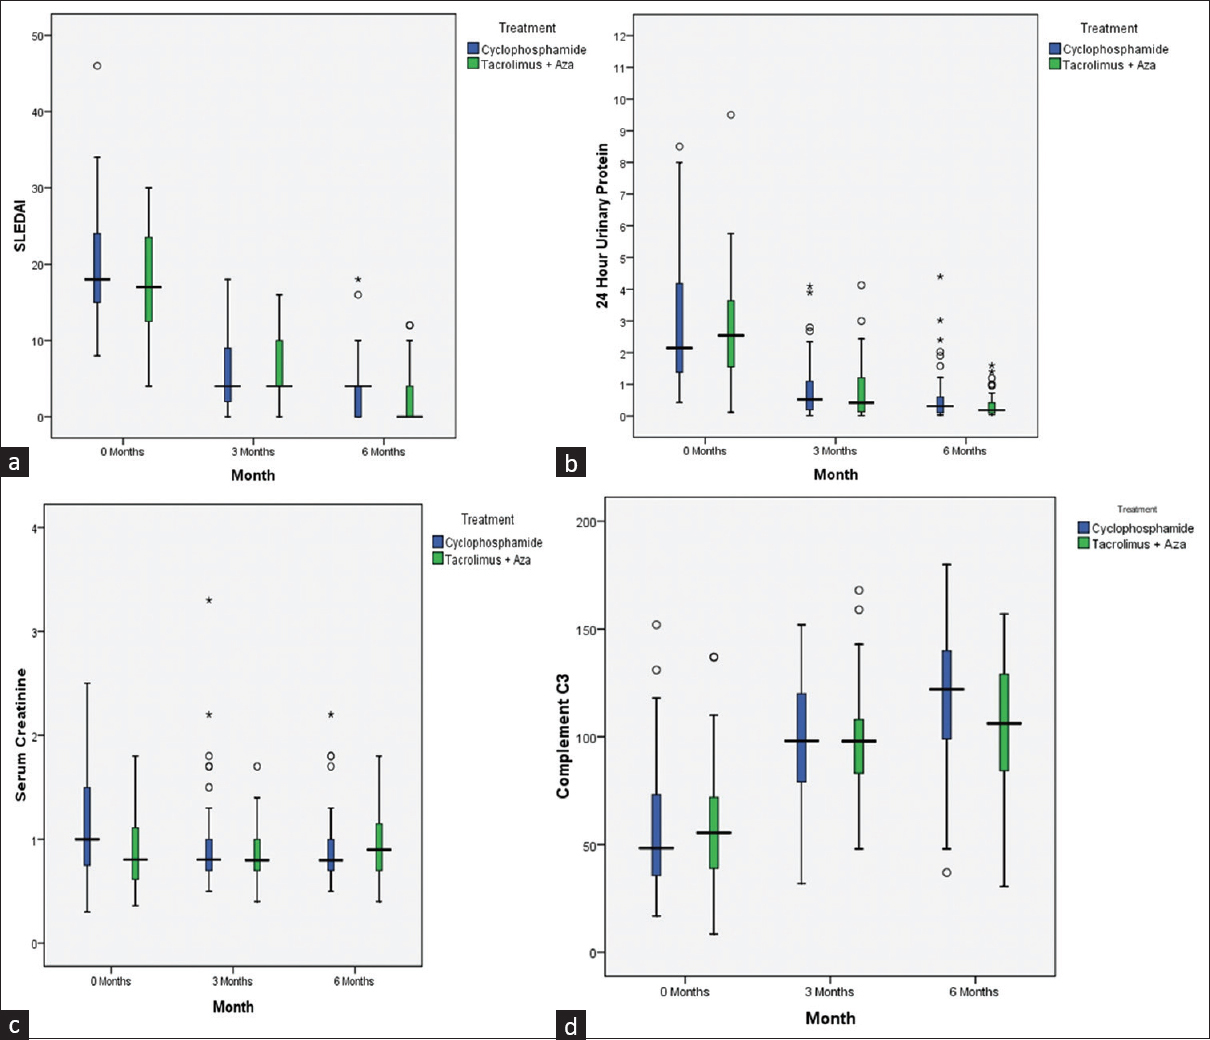 (a–d) Box plots of SLEDAI (a), proteinuria (b), serum creatinine (c), and complement factor 3 (d) at baseline, 3 months, and 6 months in the MMTT group and IV CYC group. (a) There was significant improvement in SLEDAI score in both the arms from baseline to M3 and M6. The mean reduction of SLEDAI score in the two arms was similar at 3 and 6 months, respectively. (b) There was significant improvement in 24-h urinary protein in both the arms from baseline to month 3 and month 6. (c) Serum creatinine level was higher at baseline in the CYC arm, which became similar at 3 months in both the arms, but at 6 months, the mean creatinine level of the multitarget arm was higher than the CYC arm. (d) Serum C3 level recovery was significantly better in both the arms compared to baseline and at month 3 and month 6, and remained comparable in both the arms at the end of 6 months. CYC = cyclophosphamide, IV = intravenous, MMTT = modified multitarget therapy, SLEDAI = systemic lupus erythematosus disease activity index